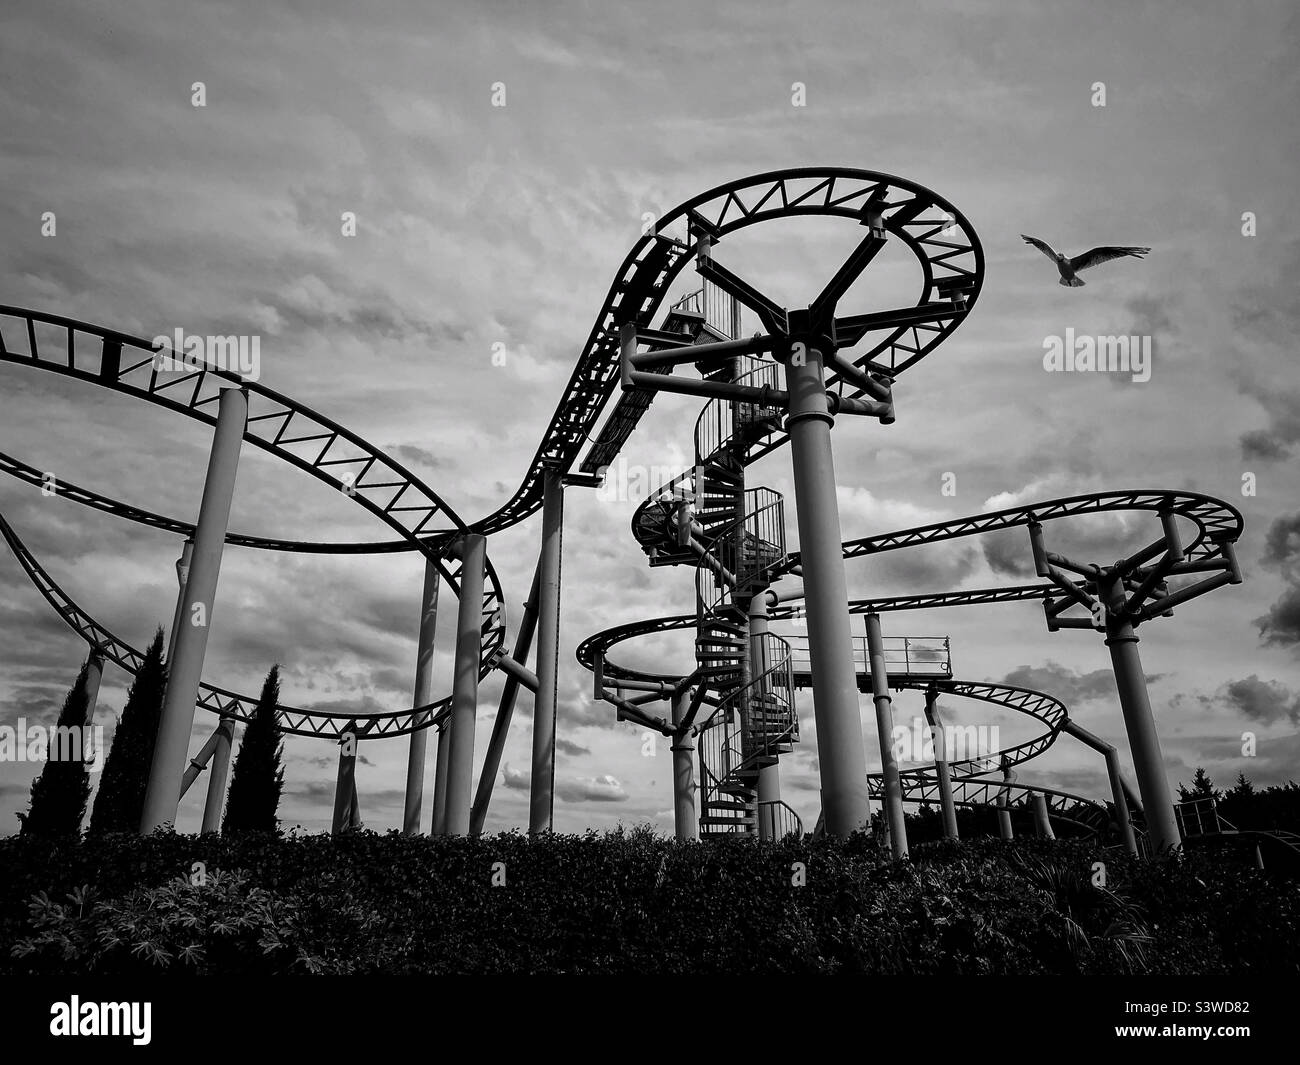 A lone seagull flys past the metal infrastructure of a roller coaster ride. There’s modify riding the course. Is it closed? Abandoned? Or a break between riders? Photo ©️ COLIN HOSKINS. Stock Photo